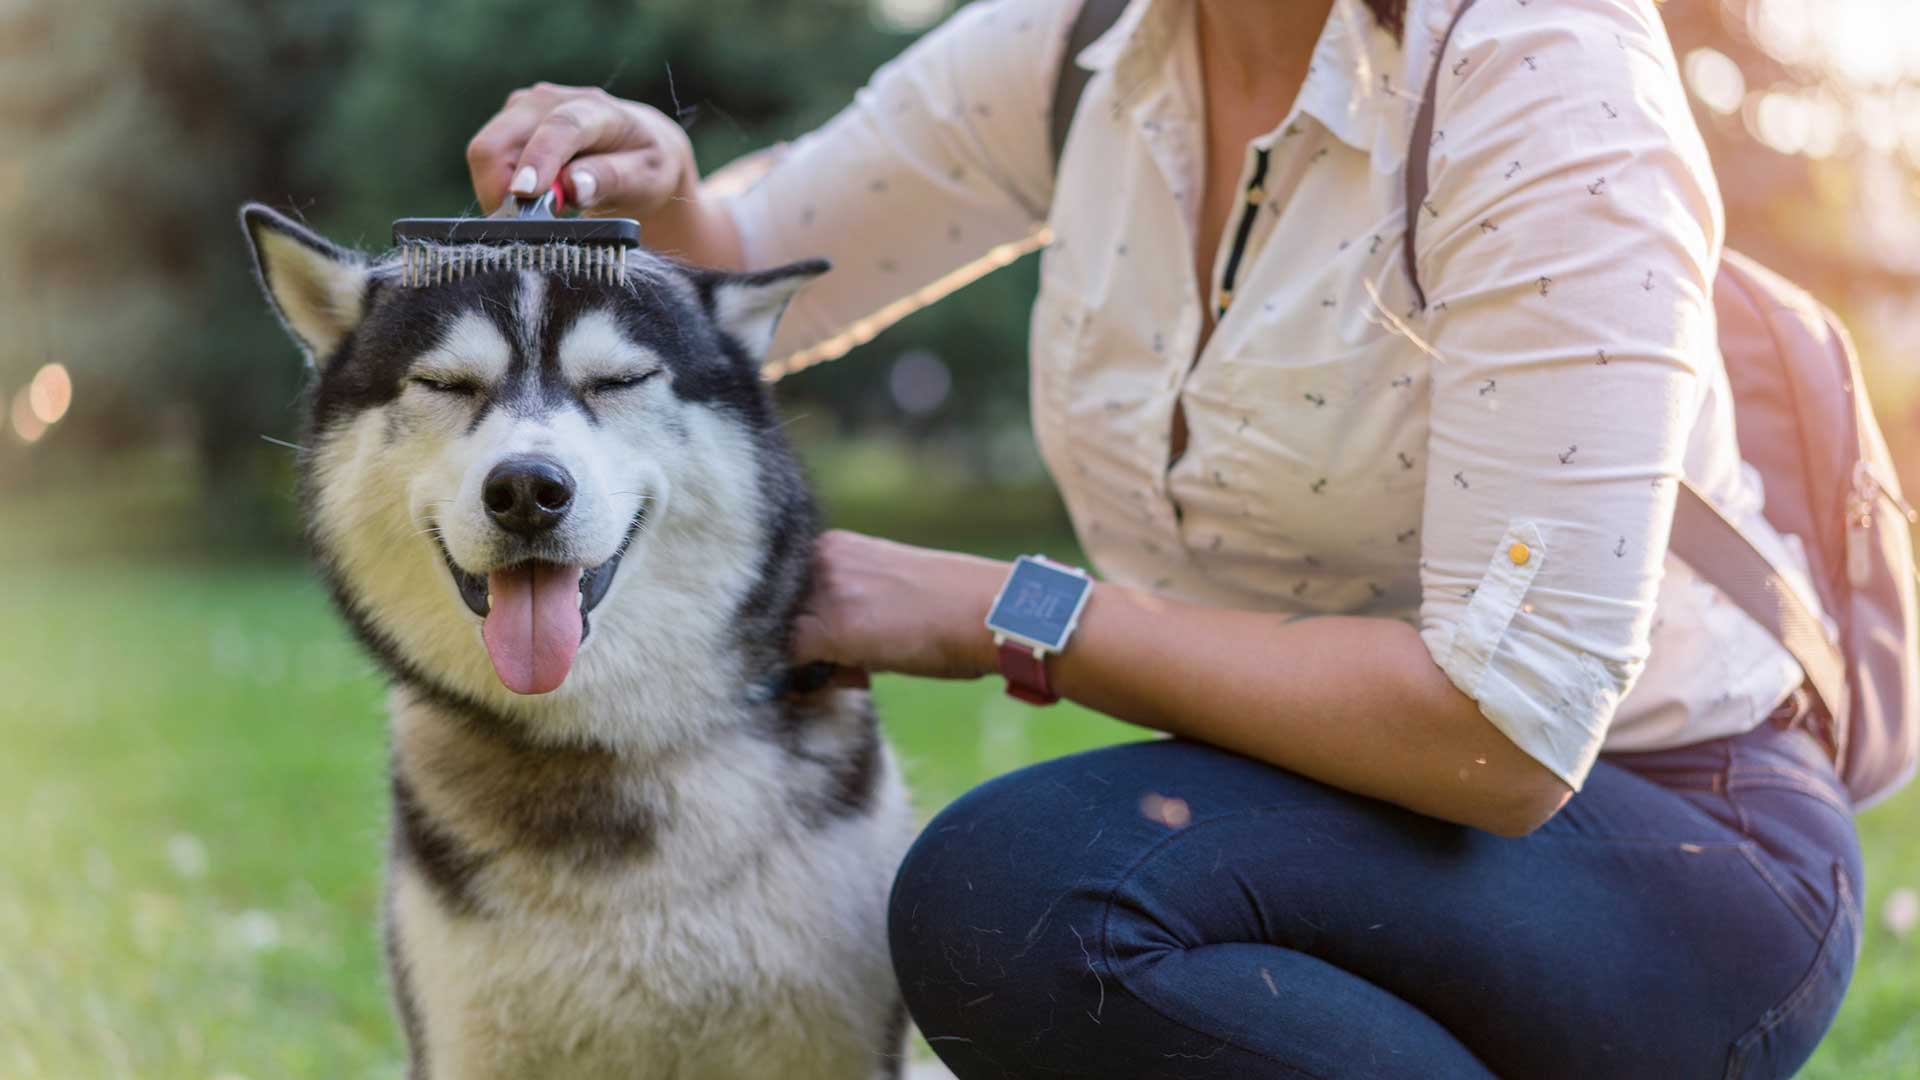 A smiling husky getting its head brushed by its owner